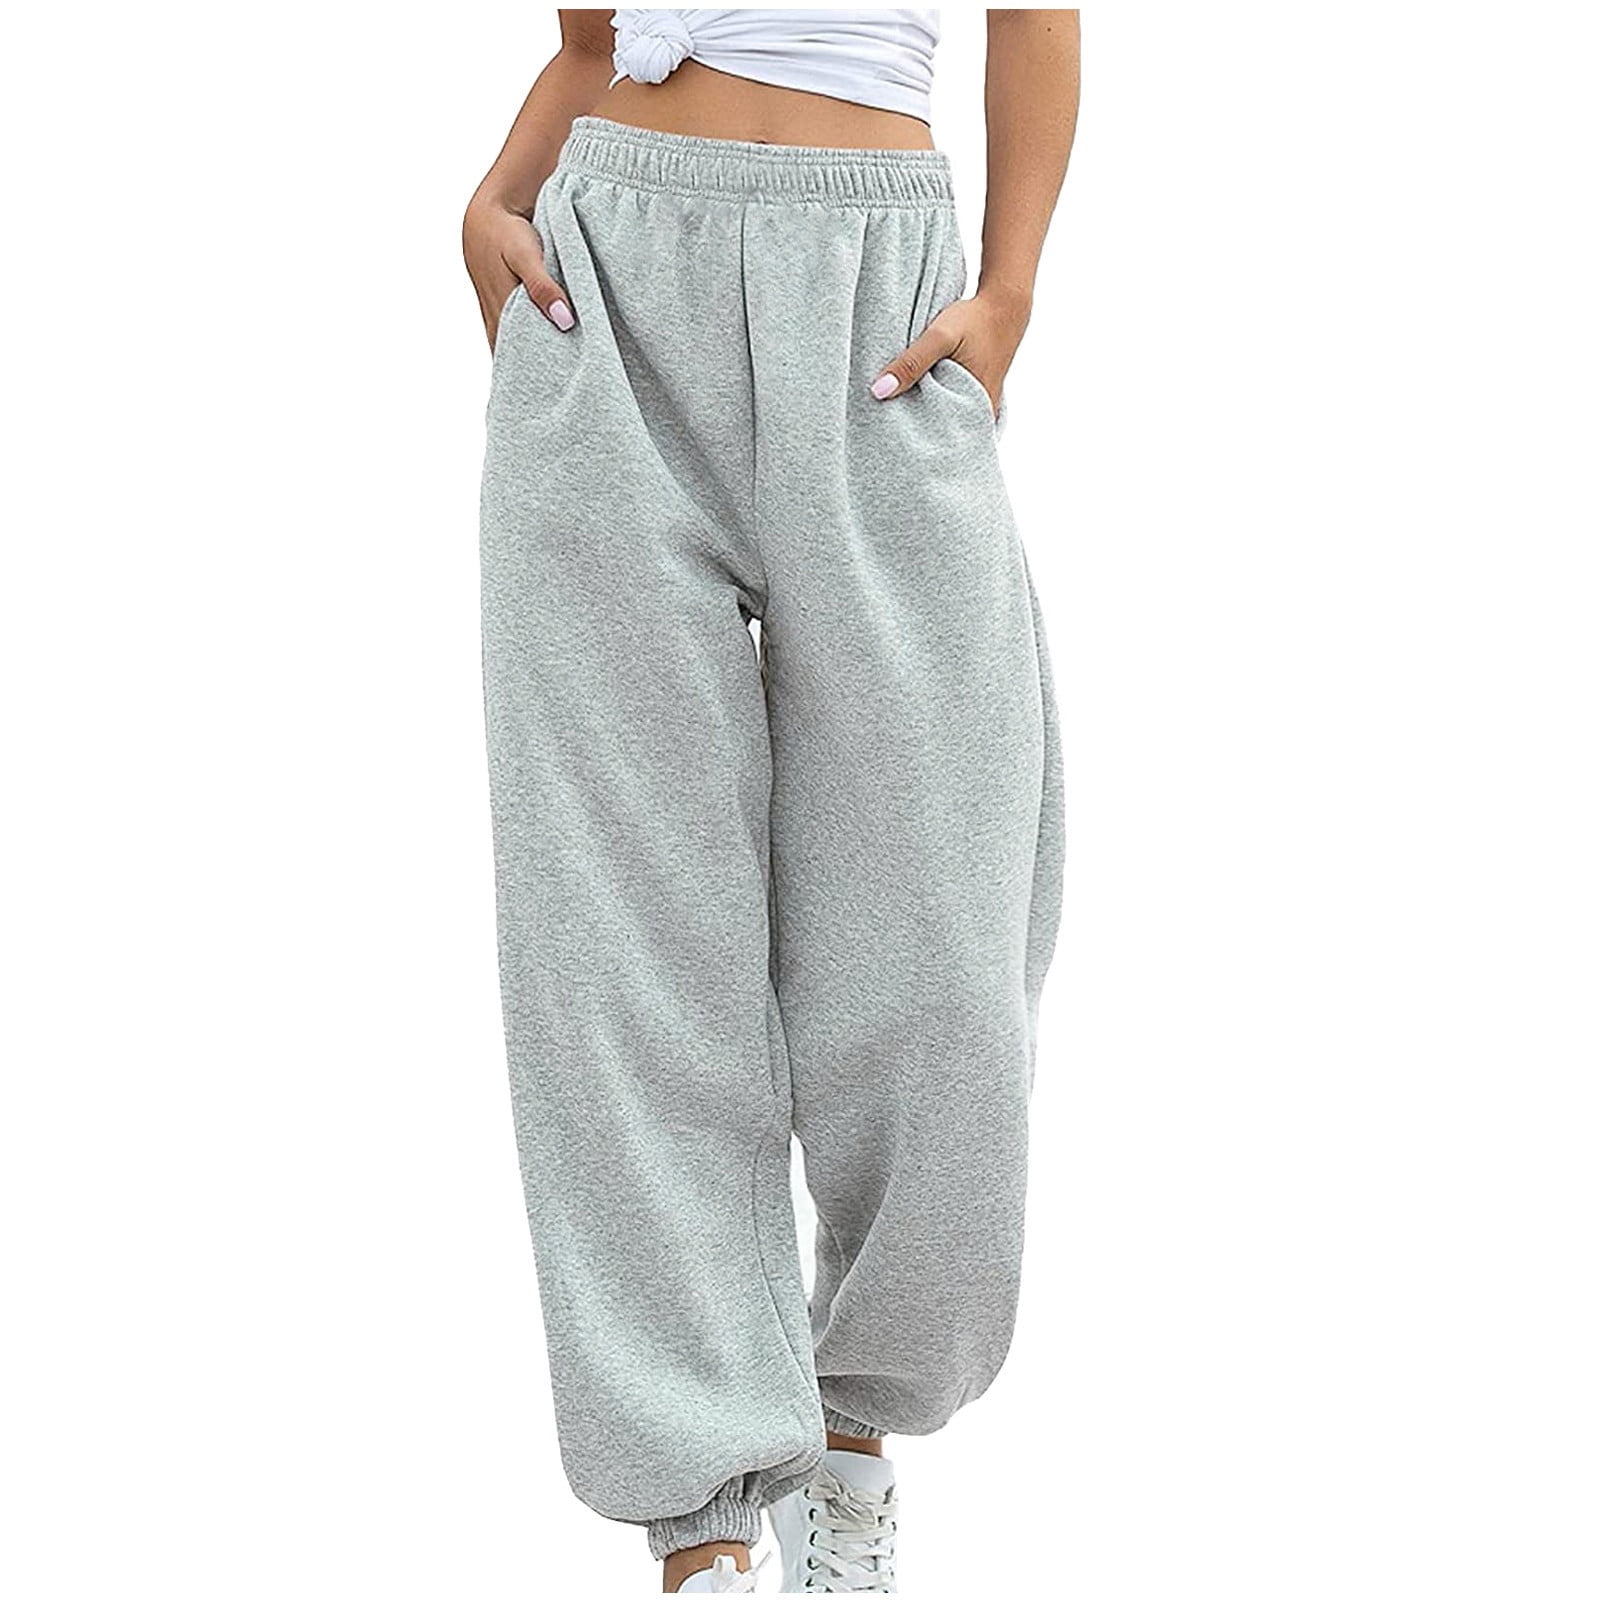 FULLSOFT Sweatpants for Women-Womens Joggers with Pockets Yoga Pants for  Lounge Workout Running